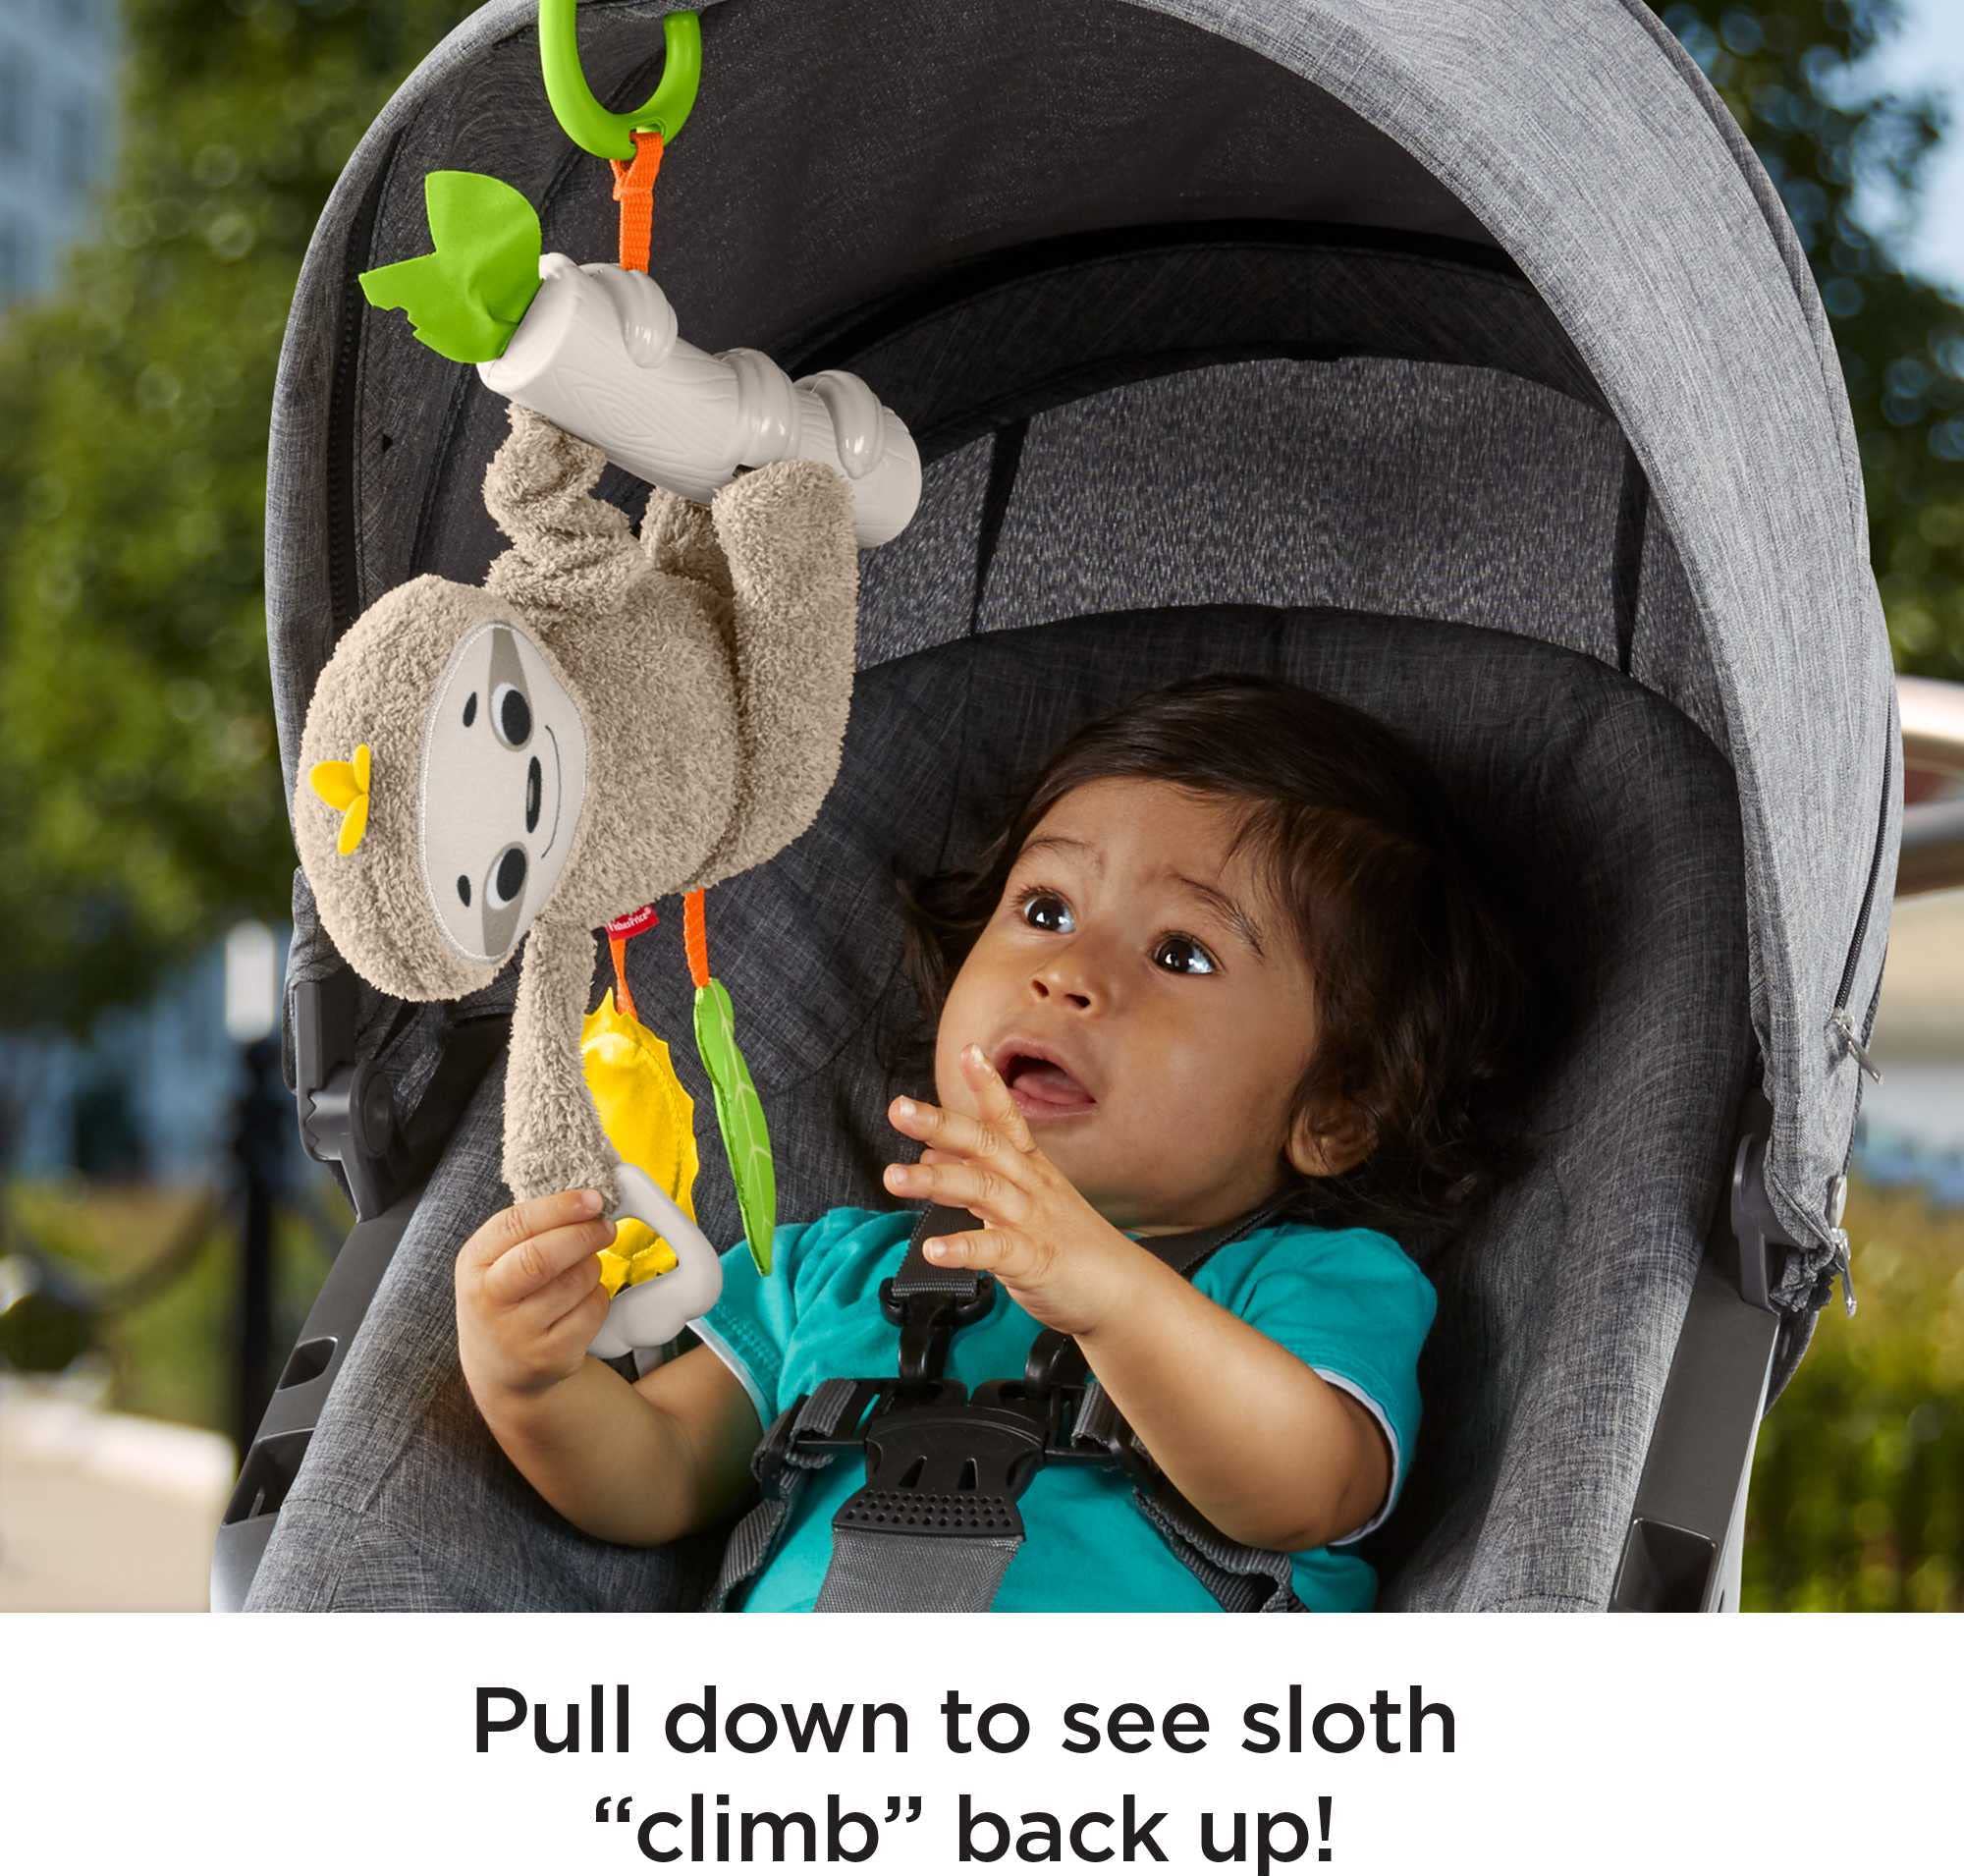 Fisher-Price Baby Toy Slow Much Fun Stroller Sloth With Motion & Sensory Details For Newborn Take-Along Play